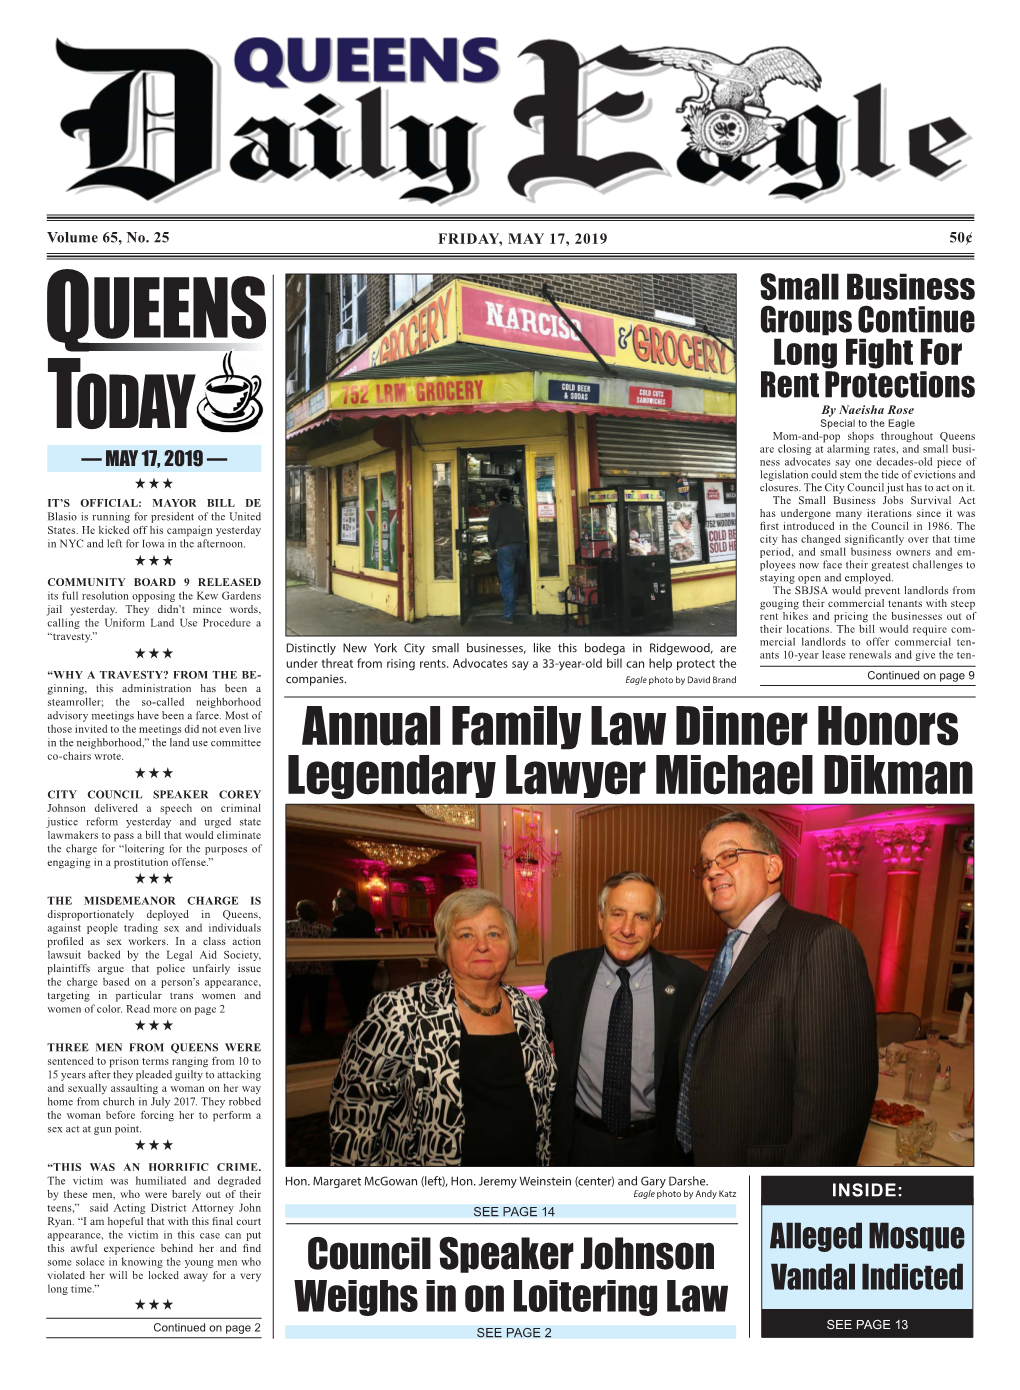 Annual Family Law Dinner Honors Legendary Lawyer Michael Dikman by Andy Katz Yoast, Who Is Originally from Fore Proposing That the Fam- Queens Daily Eagle Sacramento